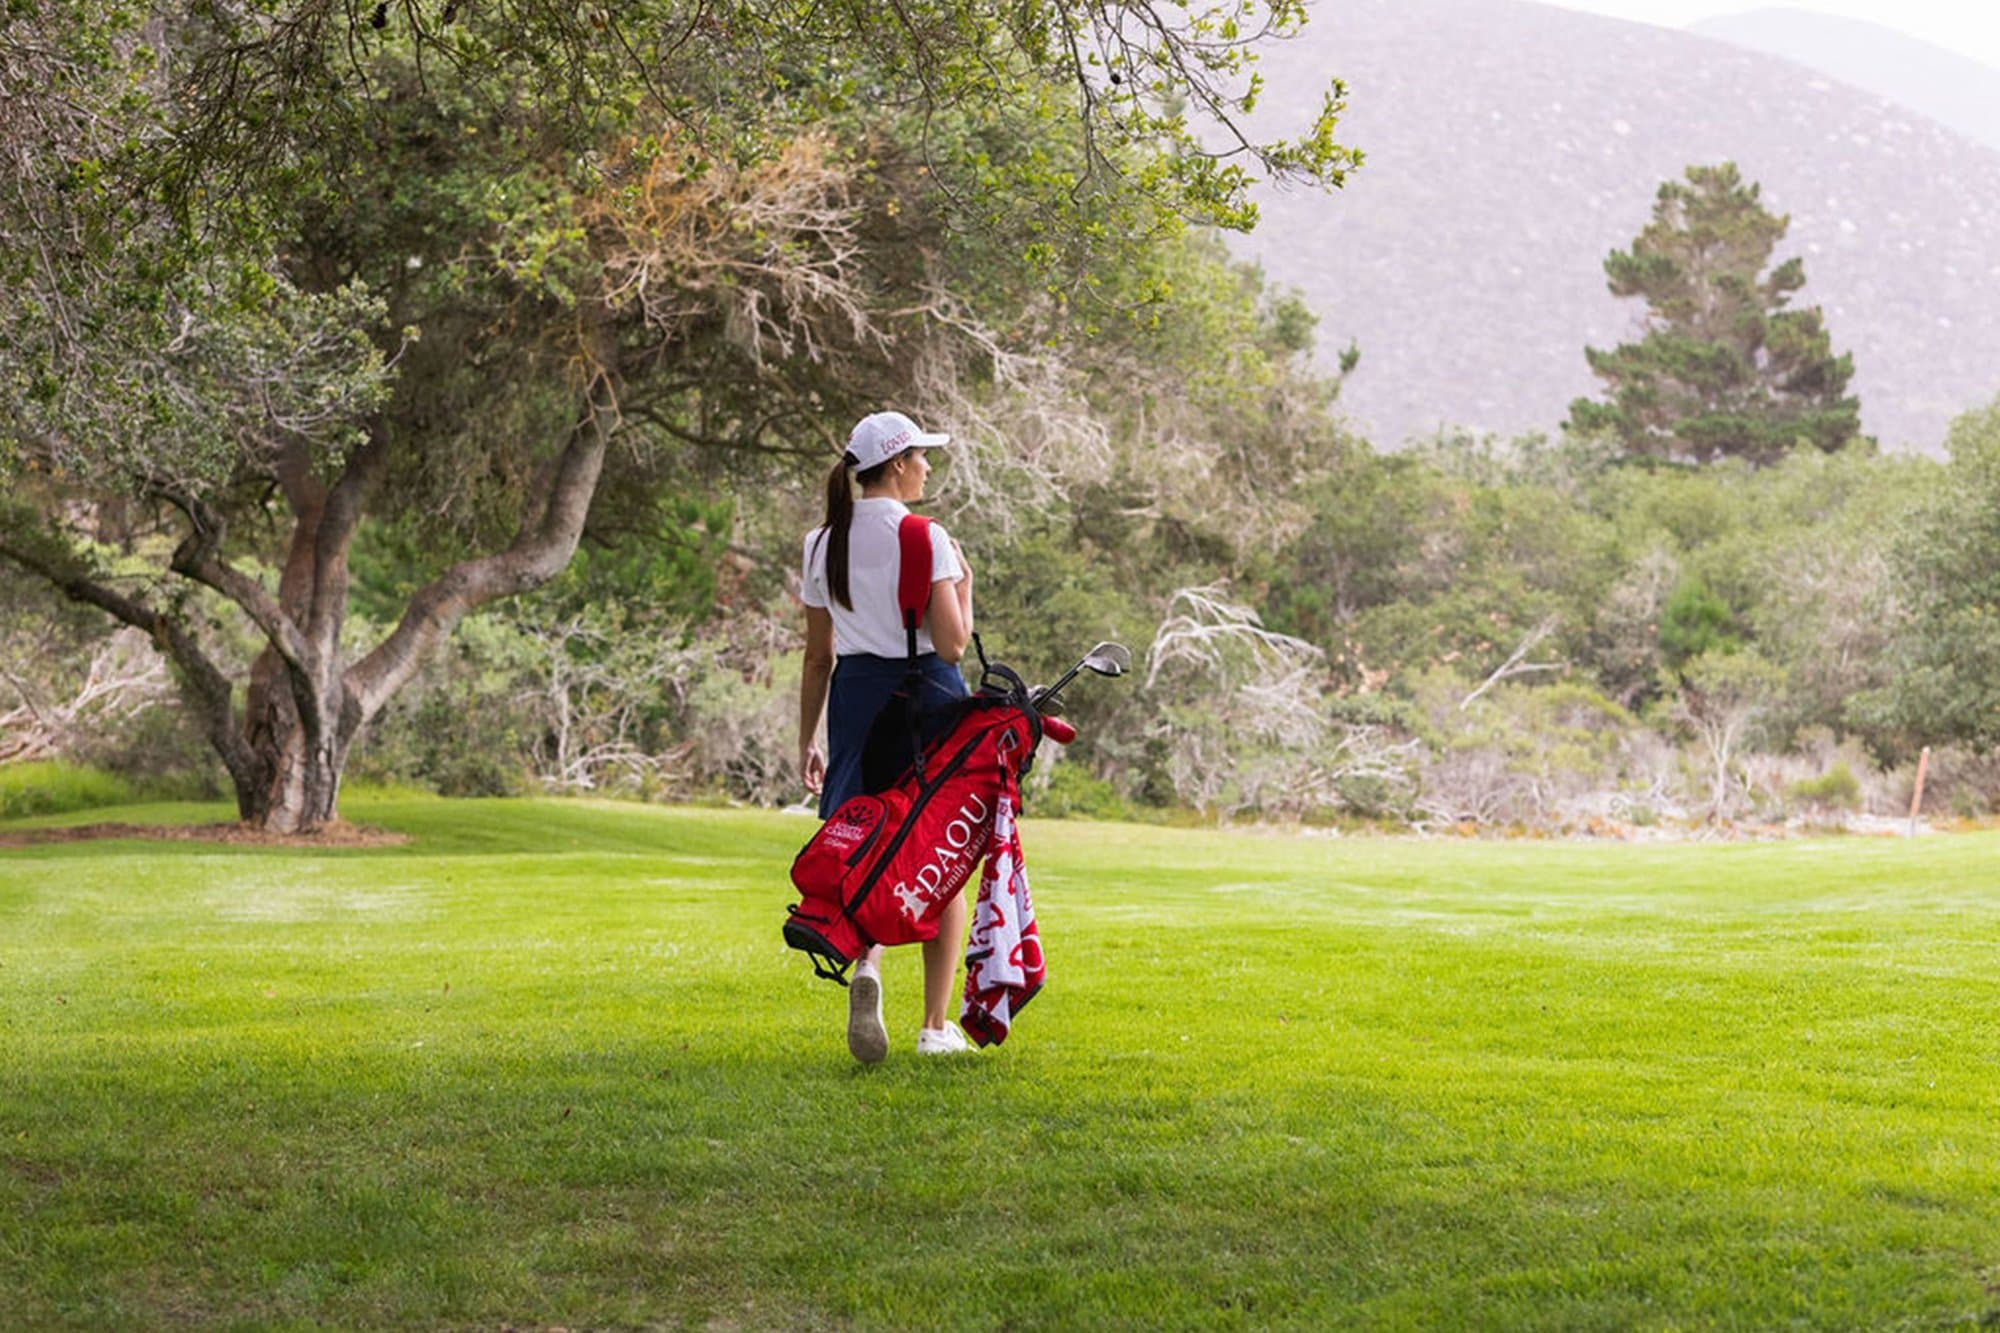 A golfer walking with the Scotty Cameron x DAOU golf bag